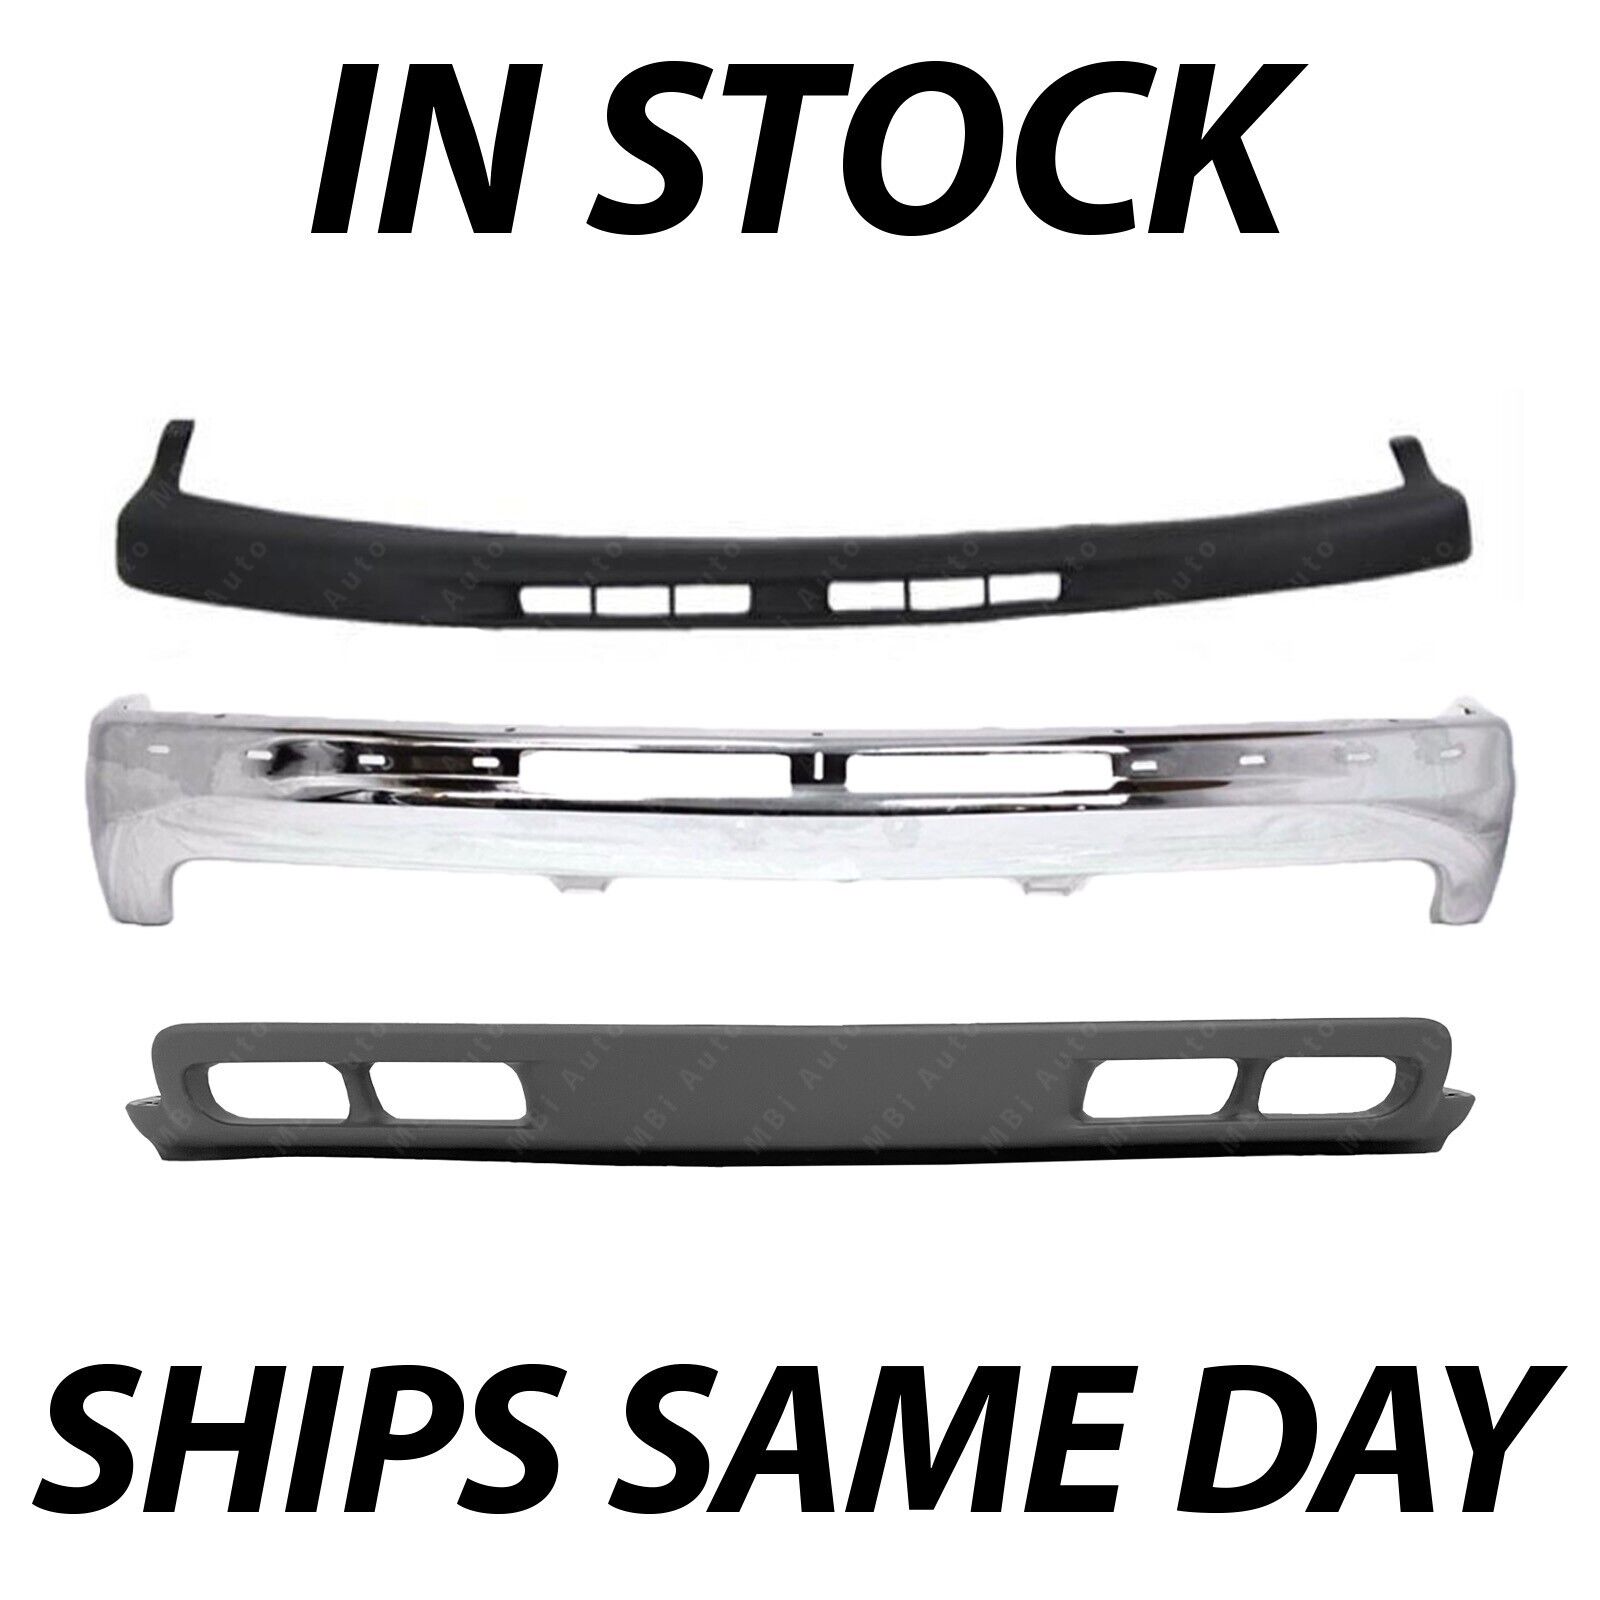 Brand New Complete Steel Front Bumper Kit For 2000-2006 Chevy Suburban Tahoe